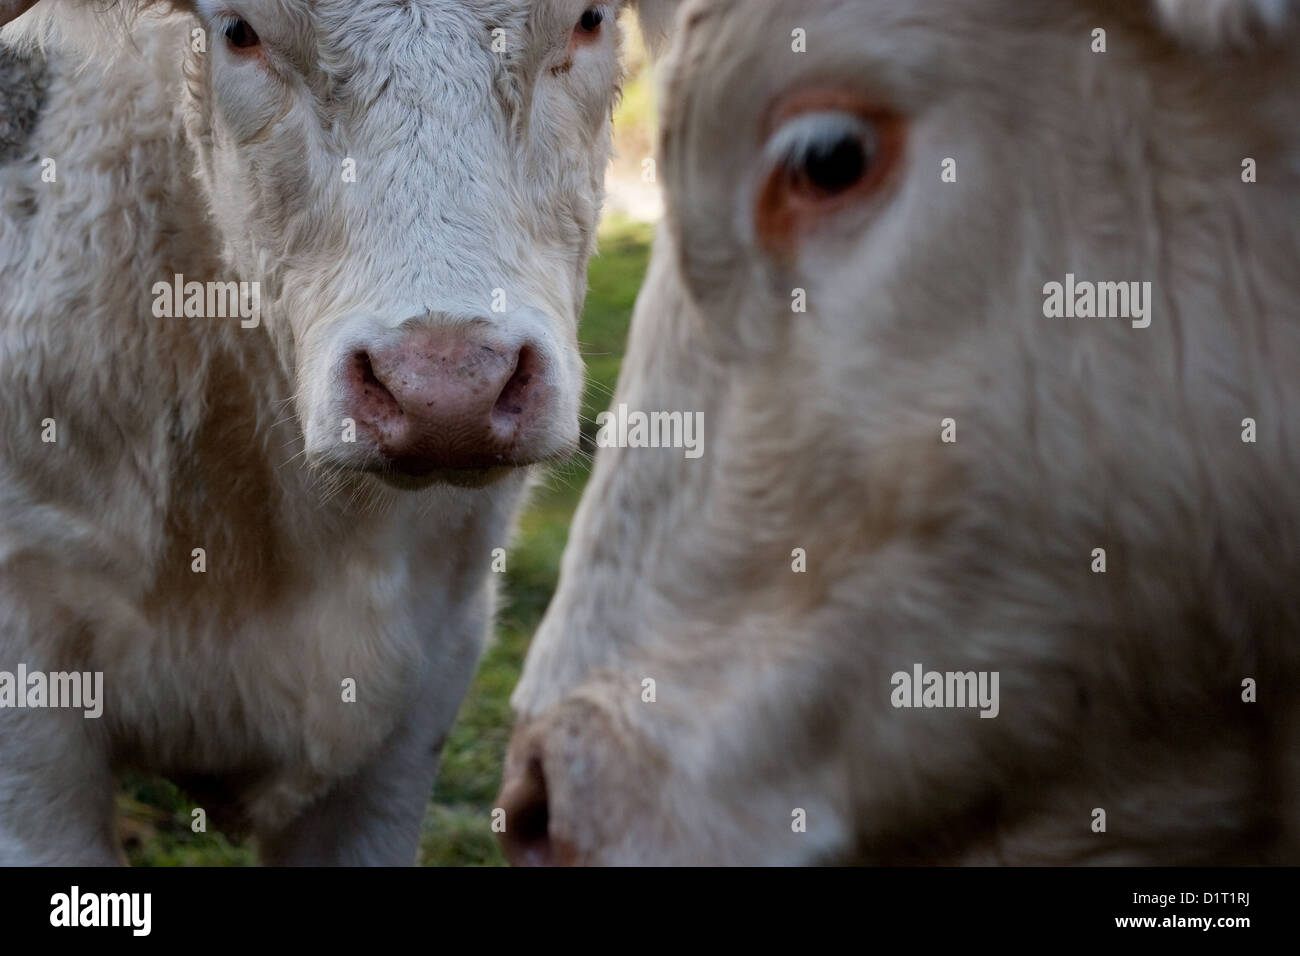 Two white cows close up with the focus on their heads and eyes Stock Photo